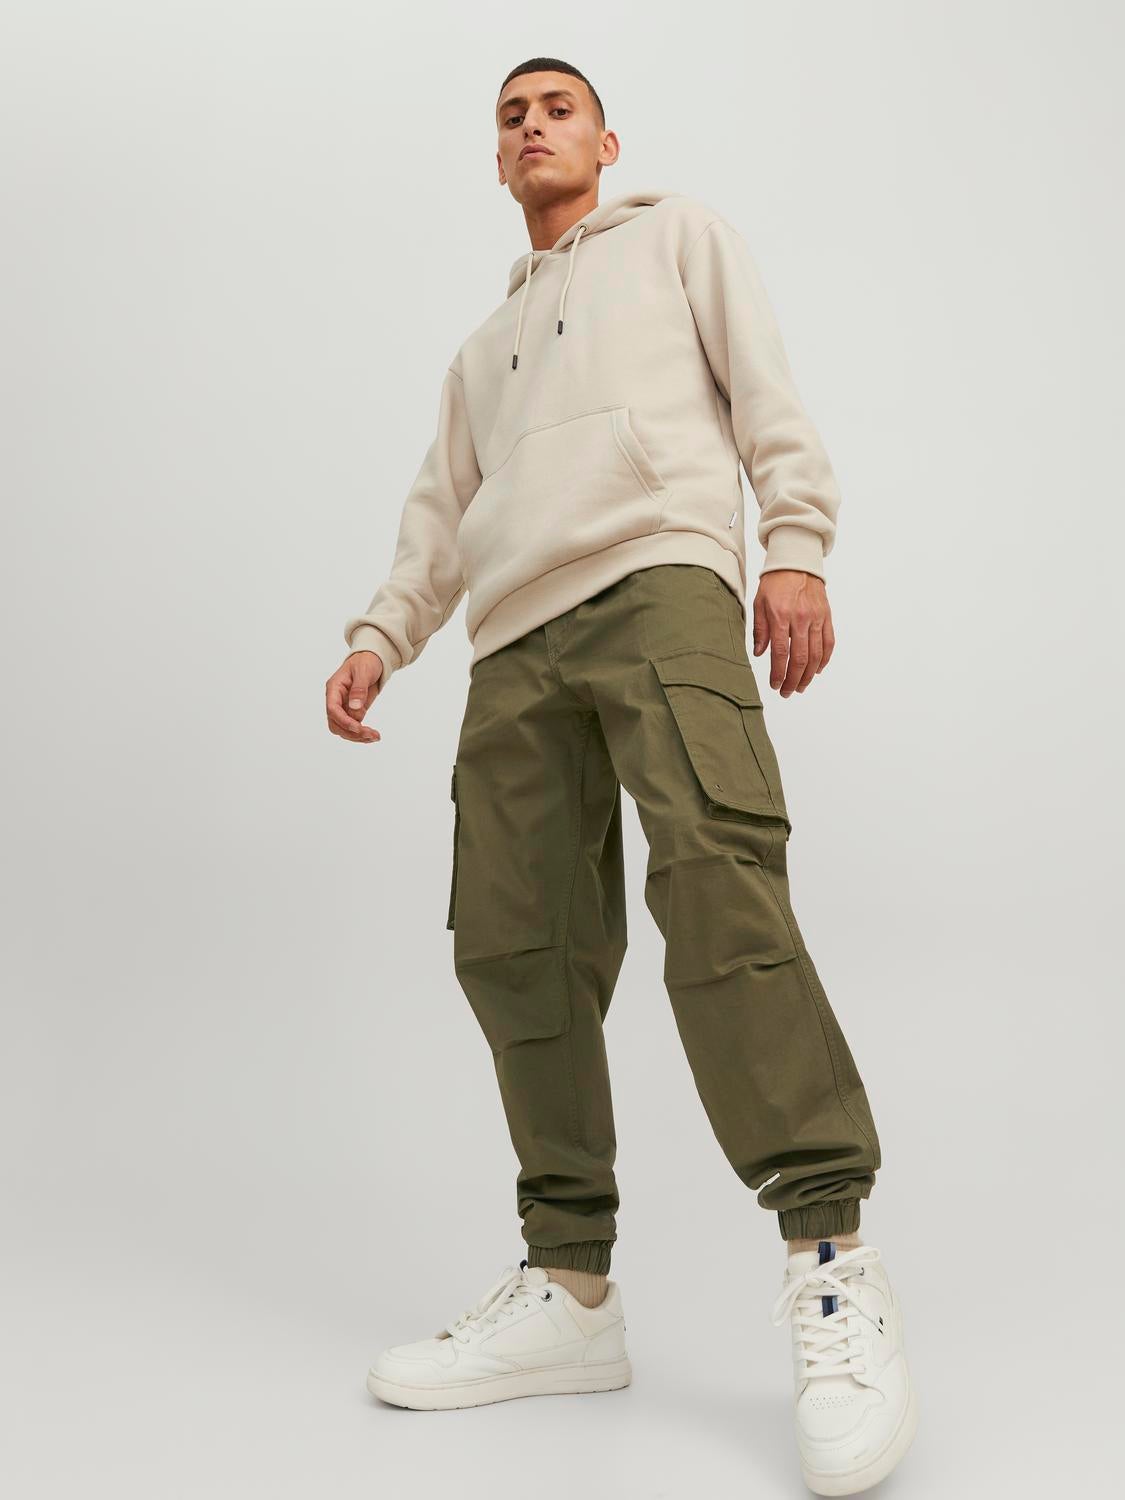 Y2k Baggy Loose Cargo Pants with Pockets High Waist Hip Hop Joggers Cargo  Trousers Sweatpants Streetwear at Amazon Women's Clothing store